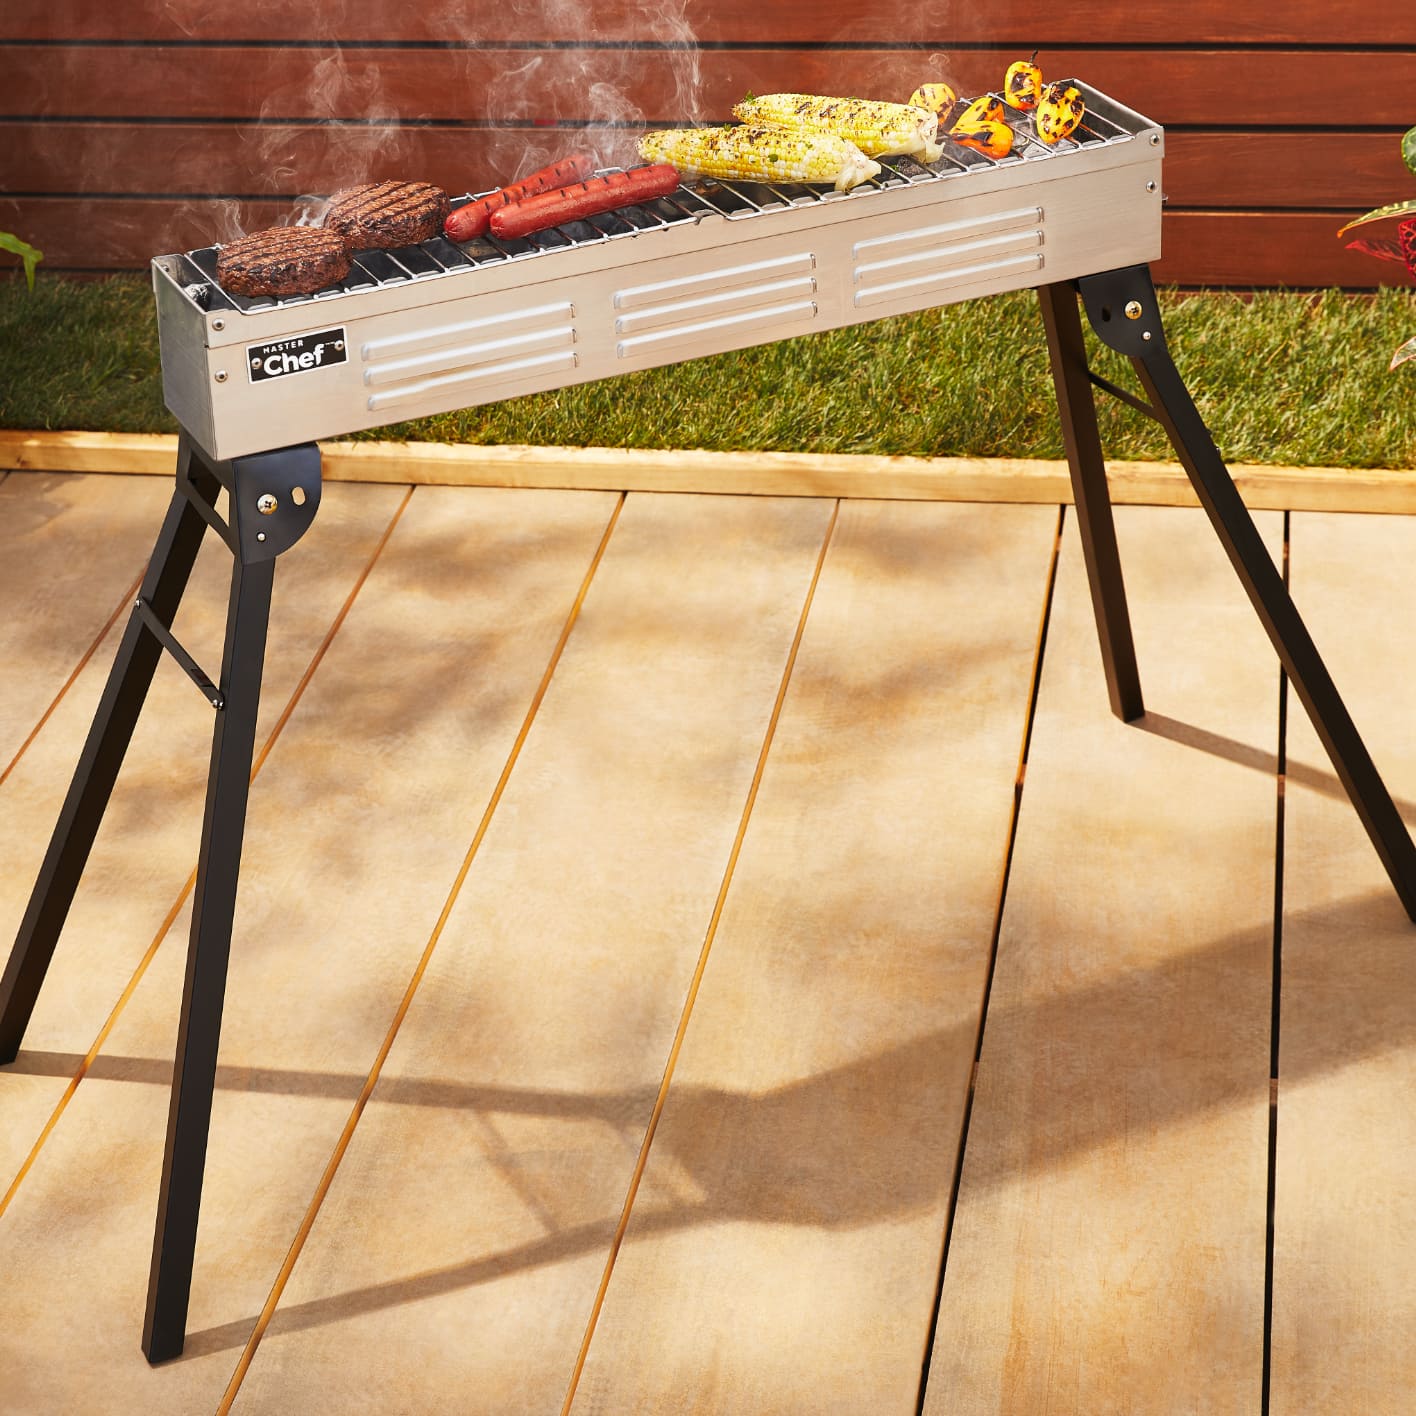 PORTABLE GRILLING 